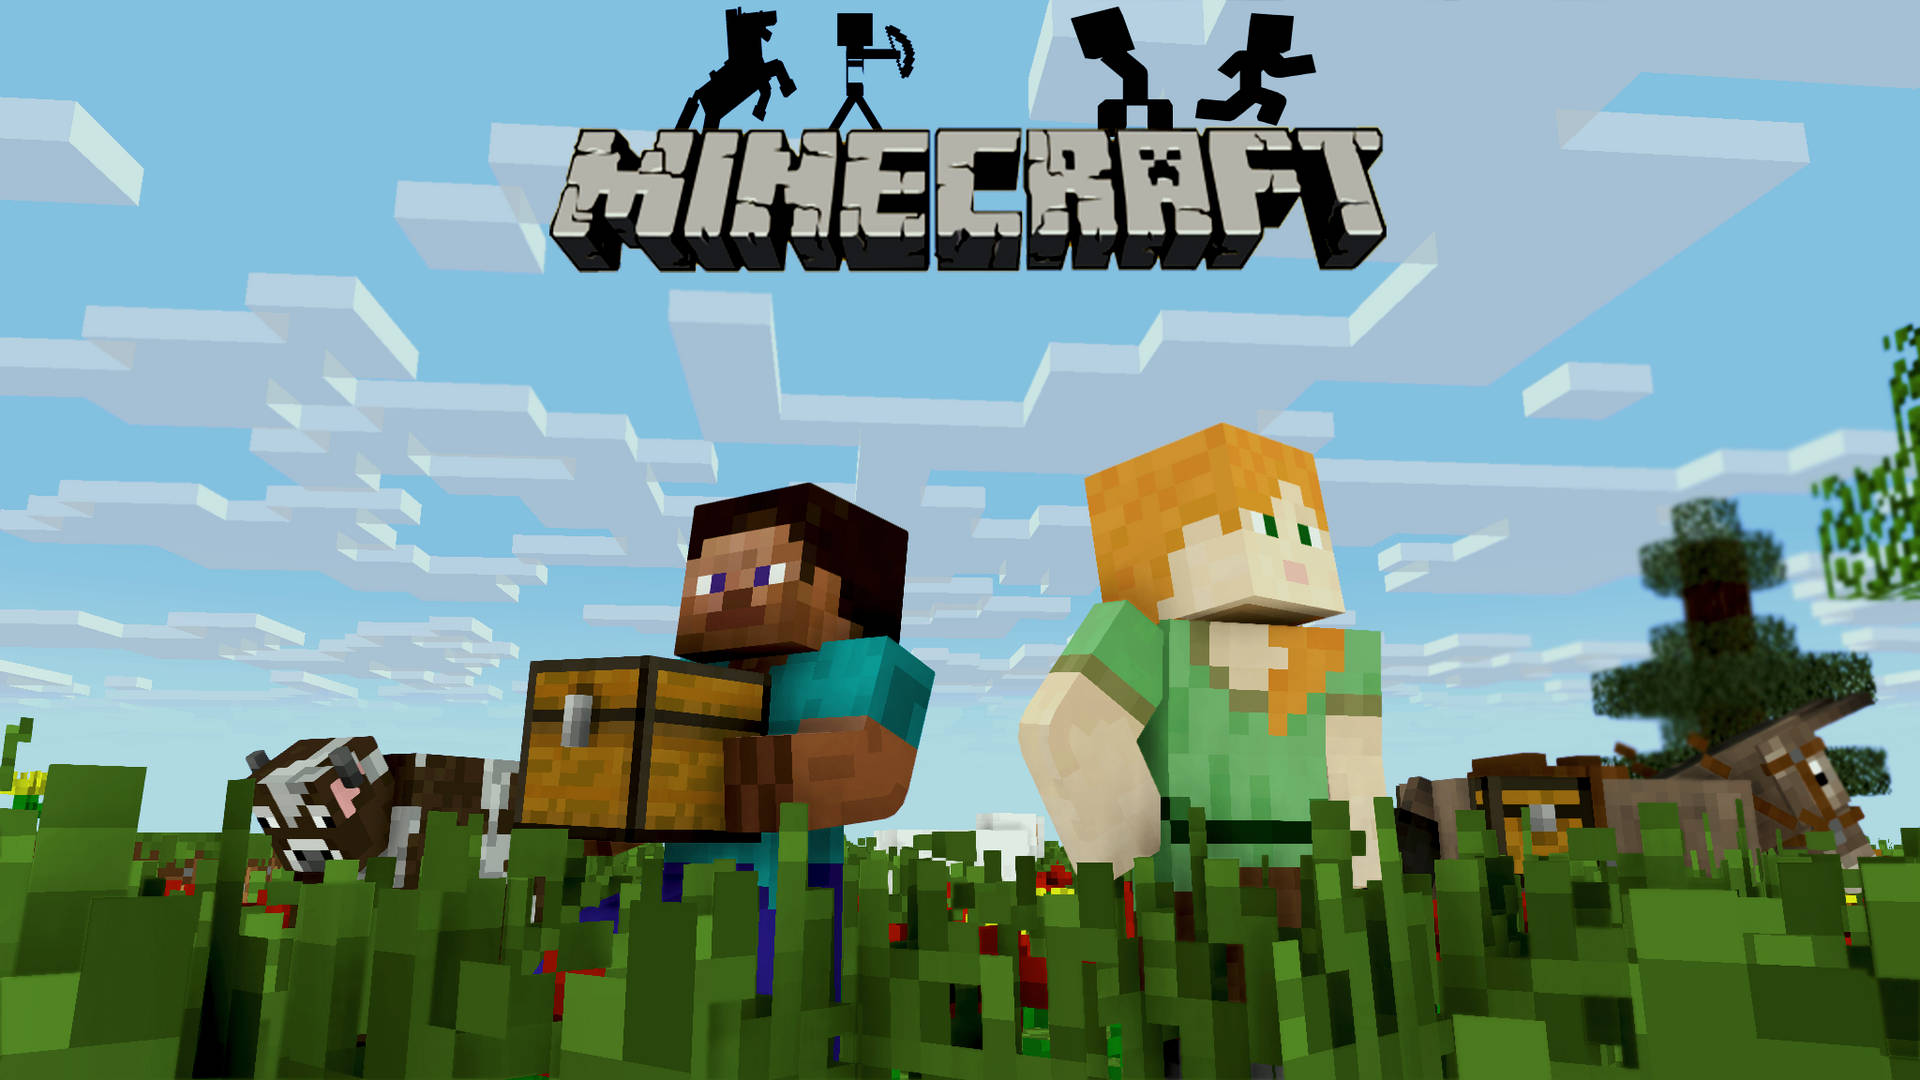 Who Are Minecraft’s Steve And Alex?